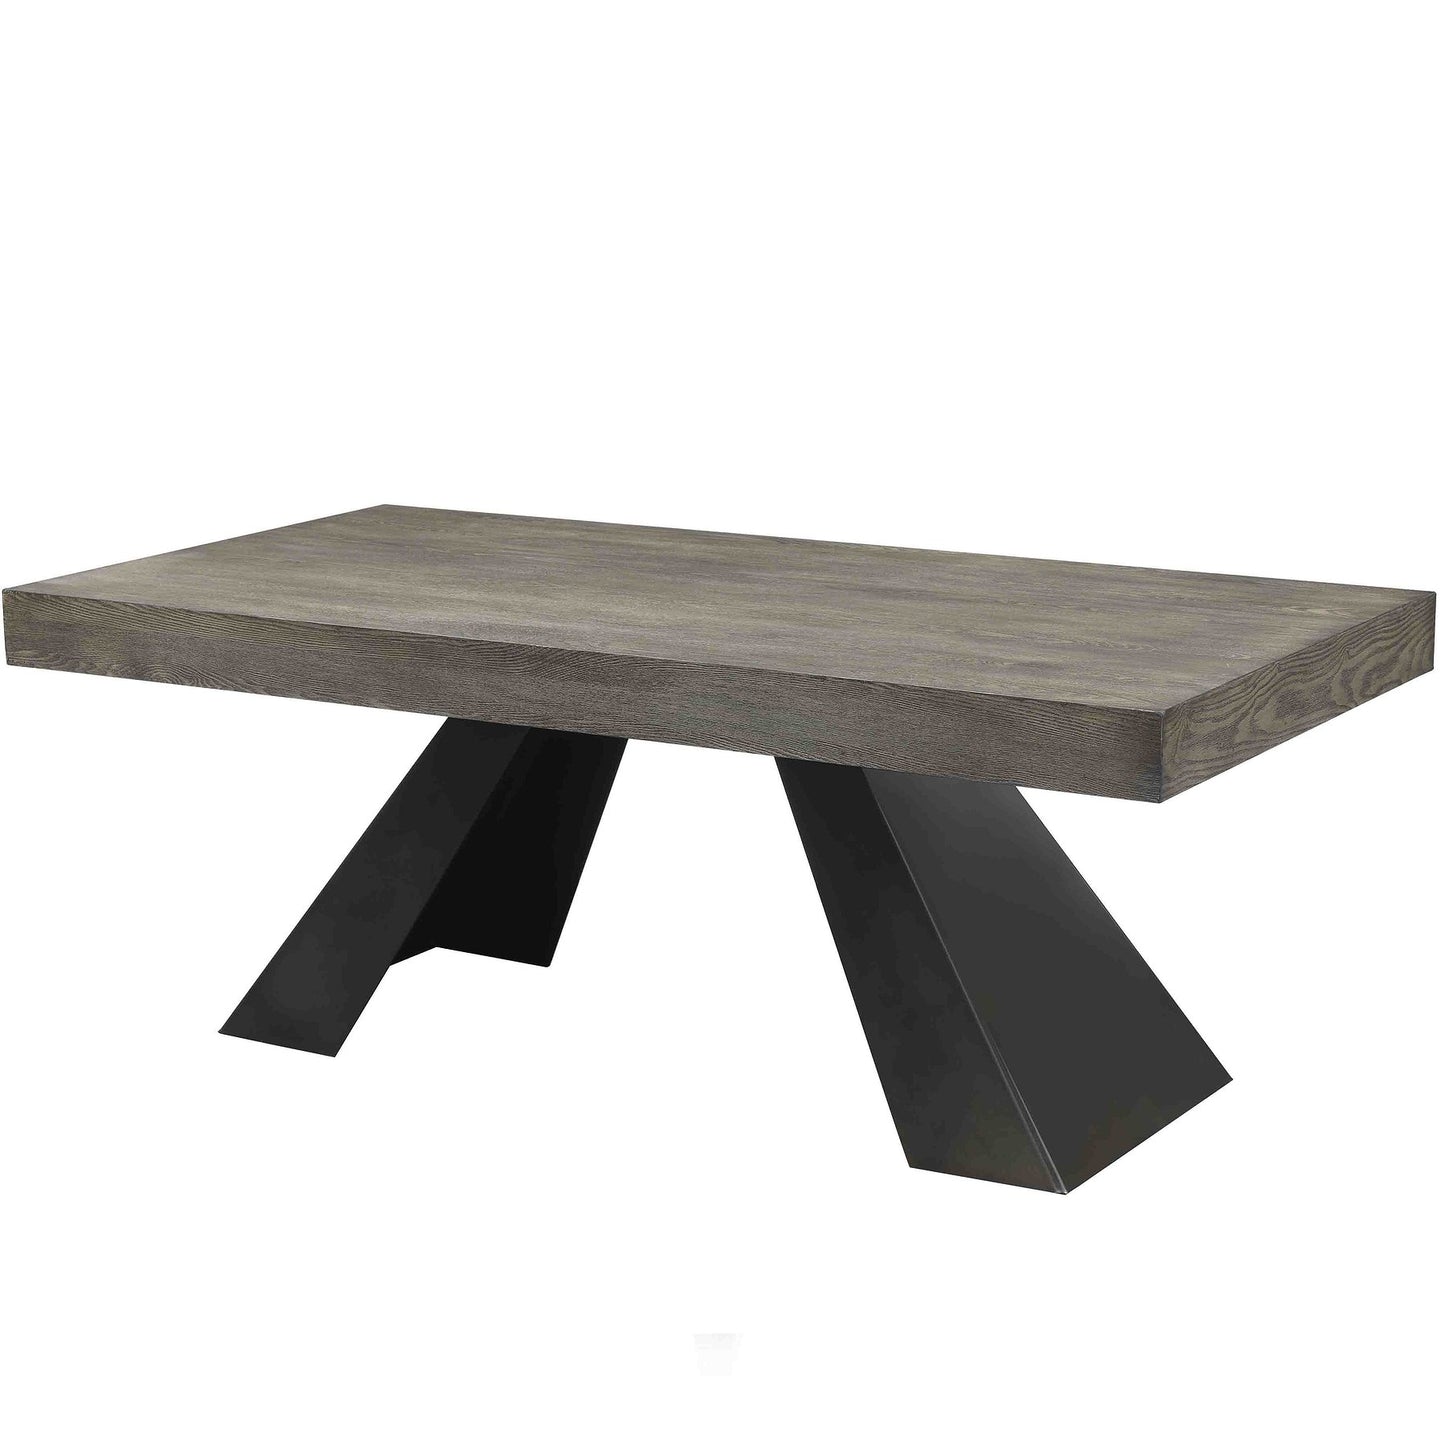 40216 brody - dining table - Dreamart Gallery